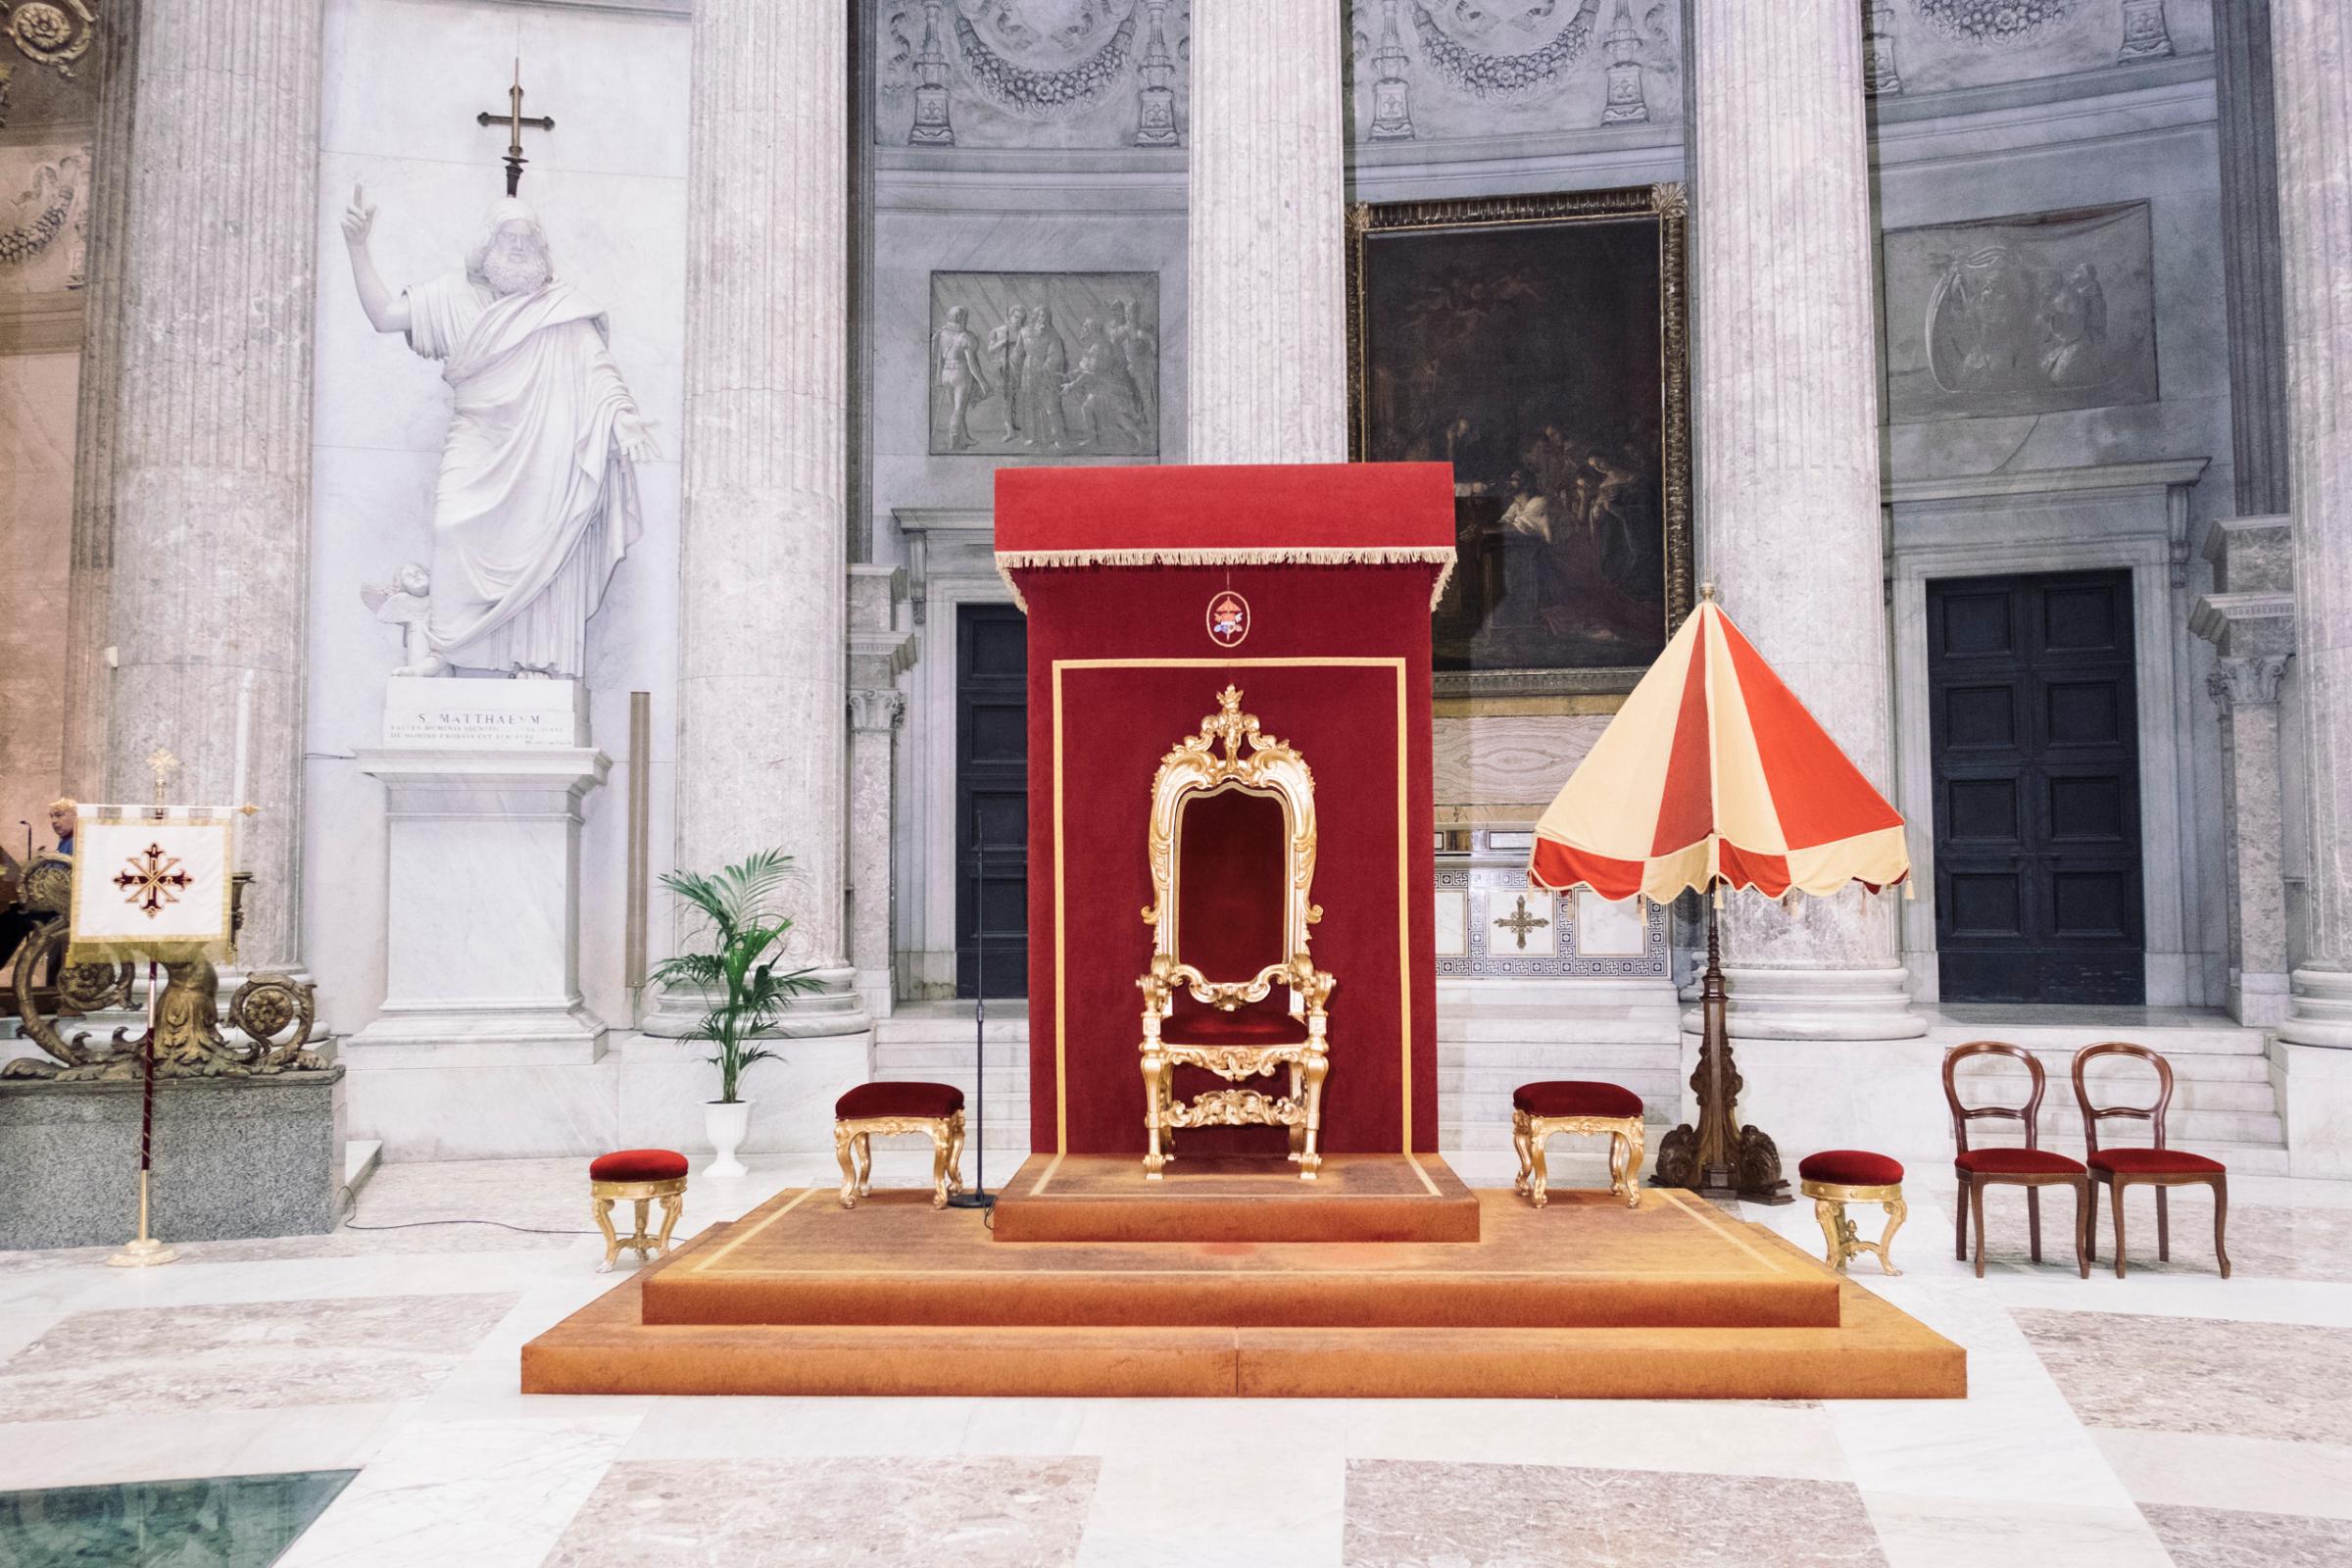 Throne in the San Francesco di Paola church, in Naples, before the investiture ceremony of the new knights of the Sacred Military Constantinian Order of Saint George, April, 2016.